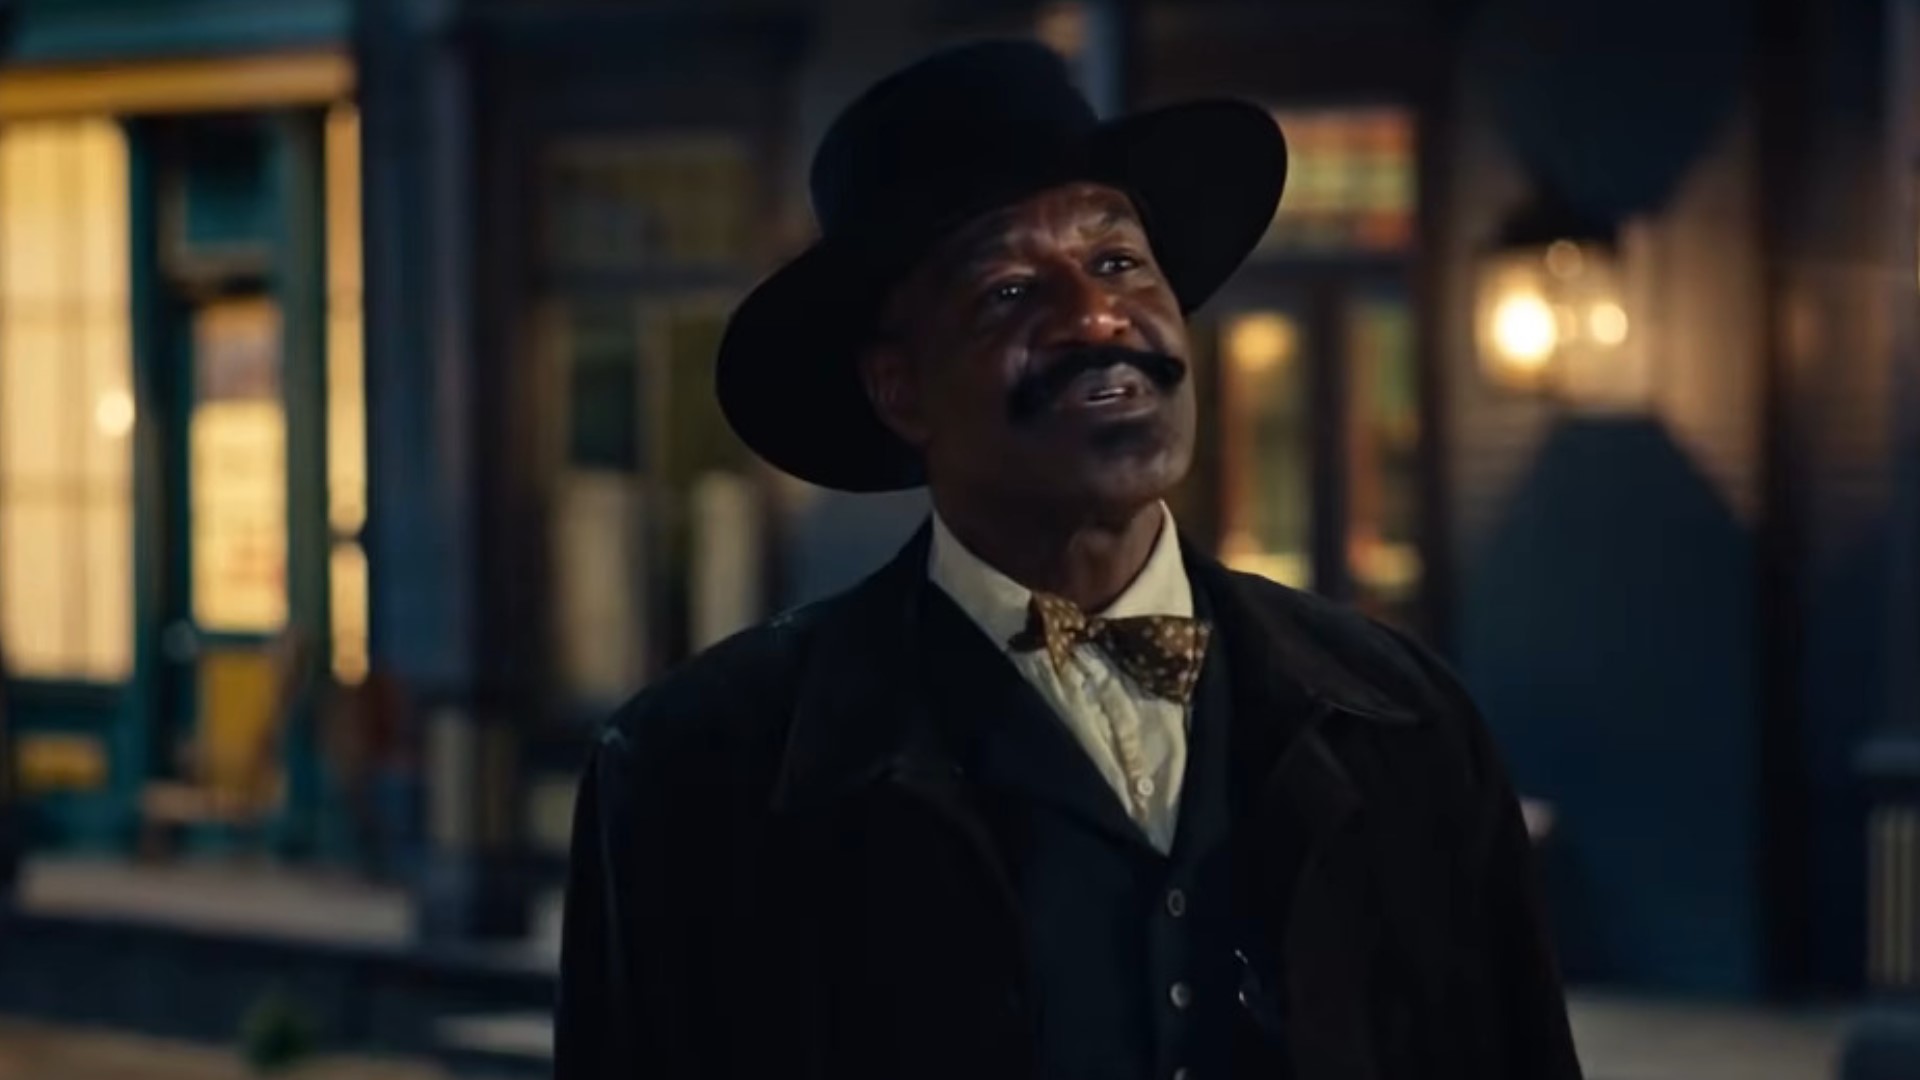 U.S. Marshal Bass Reeves featured in new Netflix film | thv11.com